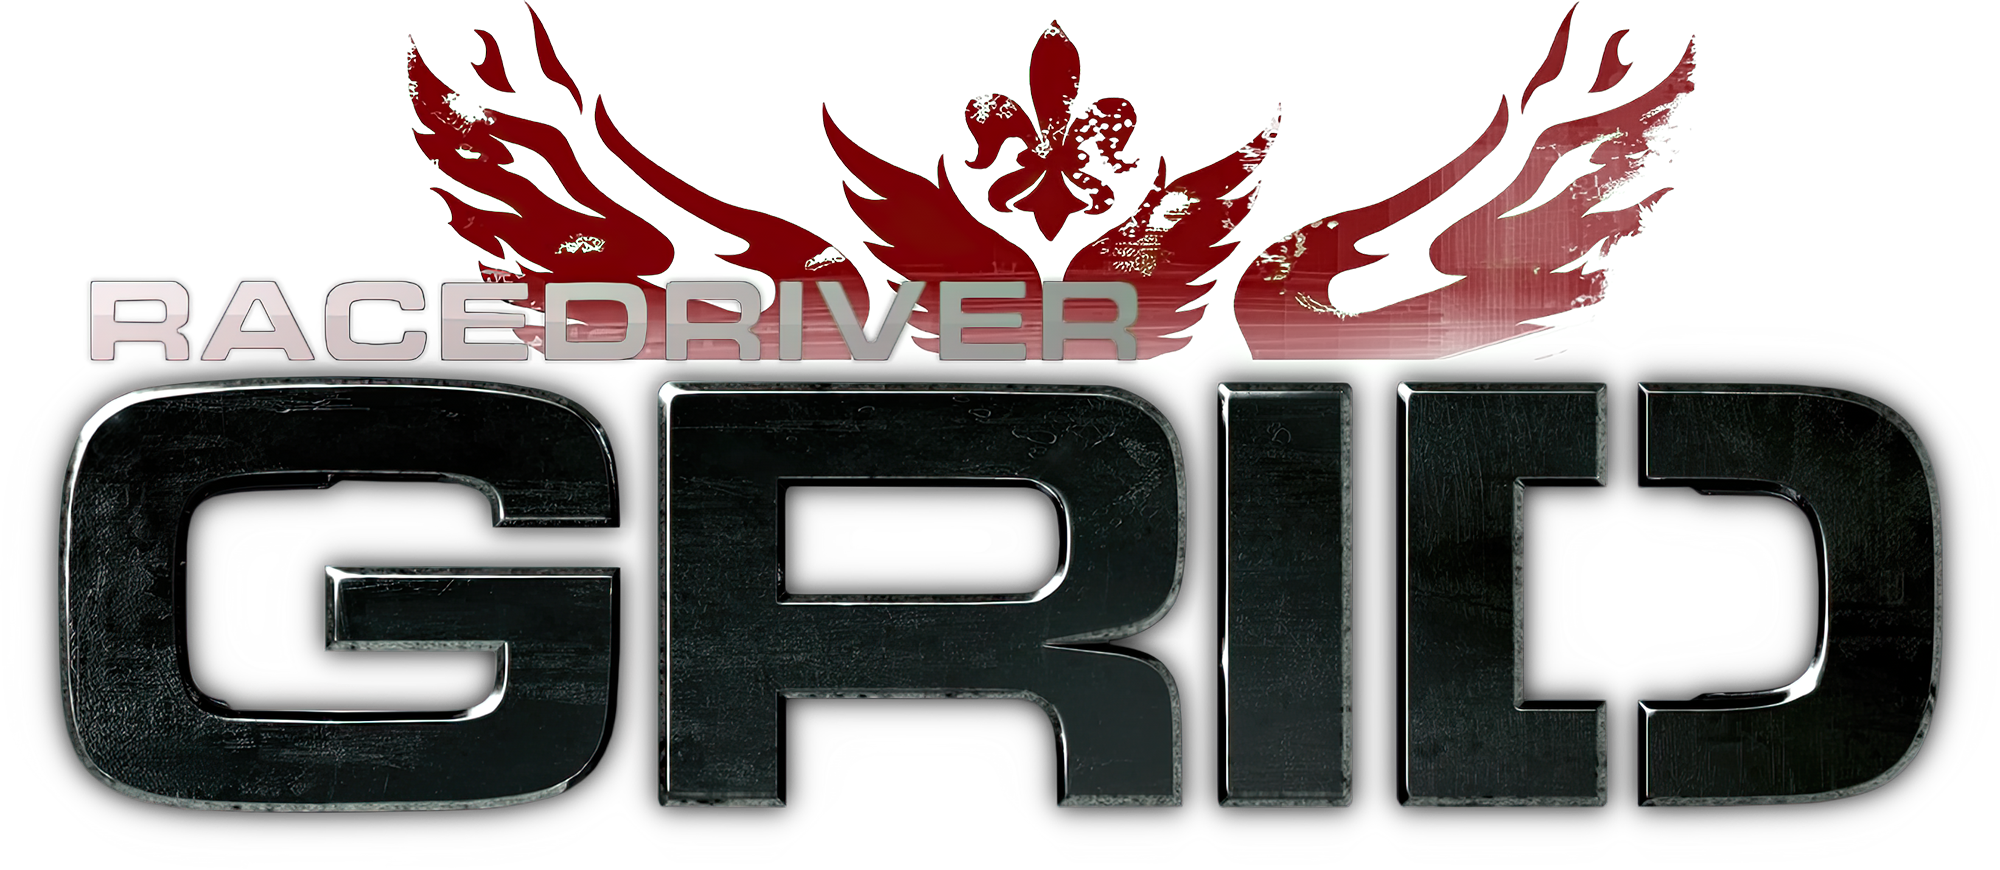 Race driver grid on steam фото 68